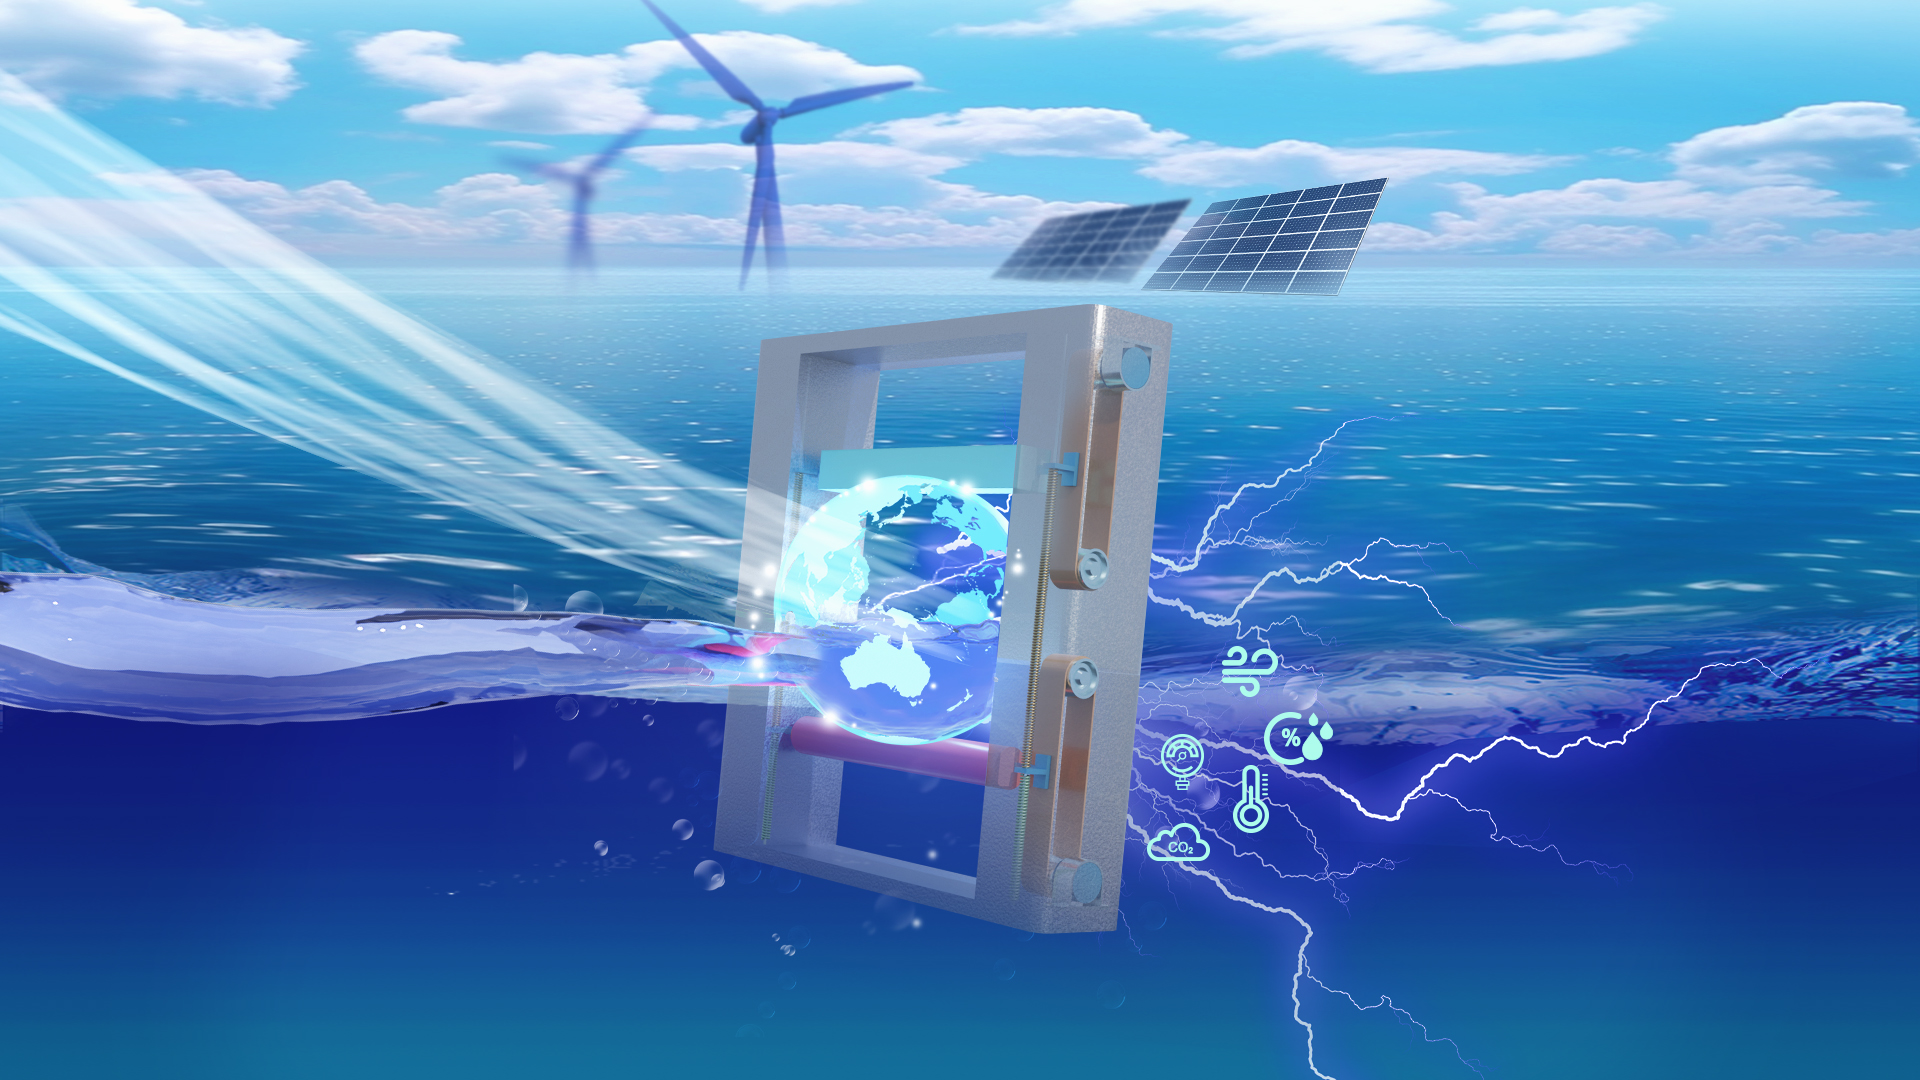 Researchers propose novel schemes for complementary exploitation of tidal current and offshore wind energies